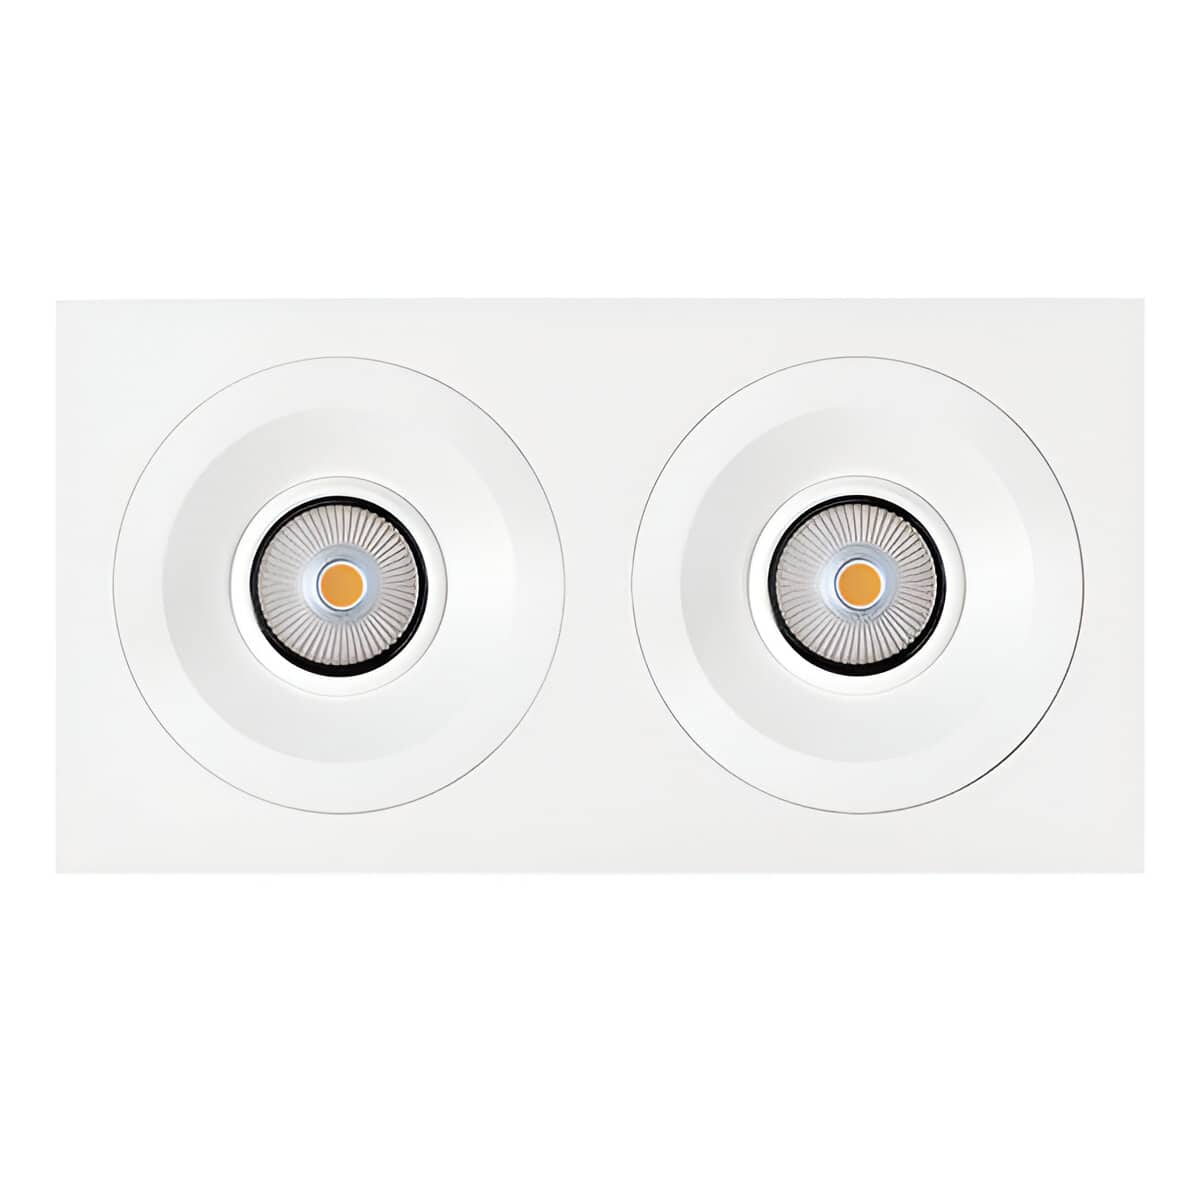 Product image of Zela twin white adapter plate with downlights inside